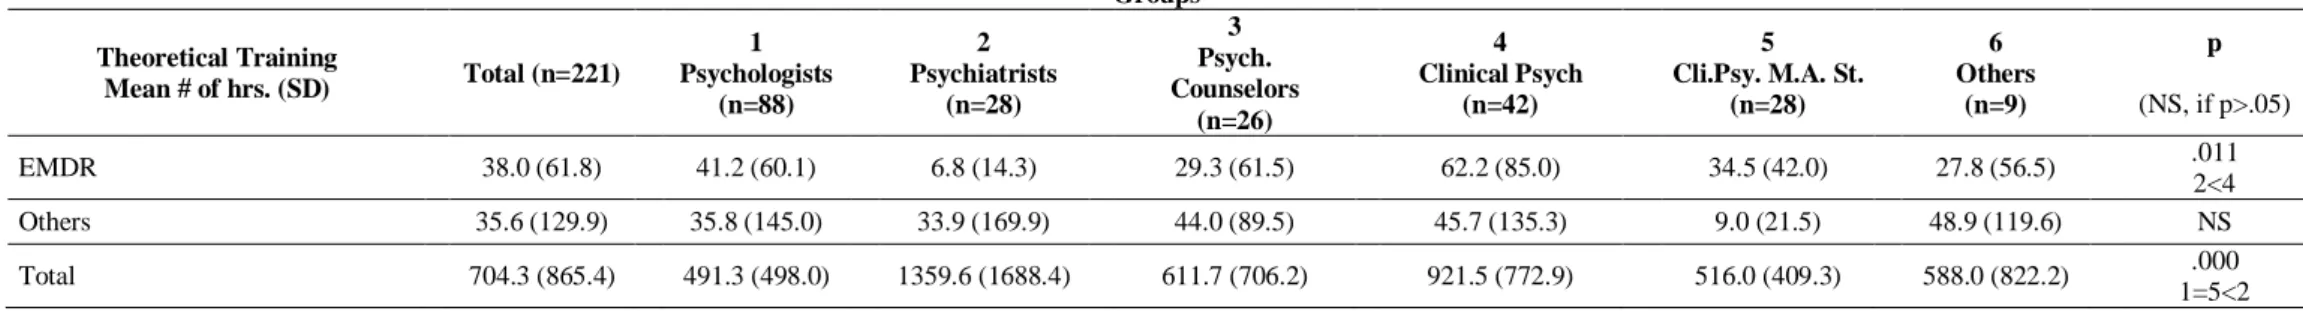 Table 6. Total Number of Hours in Theoretical Training Based on Clinical Subfields (cont’d)  Groups  Theoretical Training  Mean # of hrs